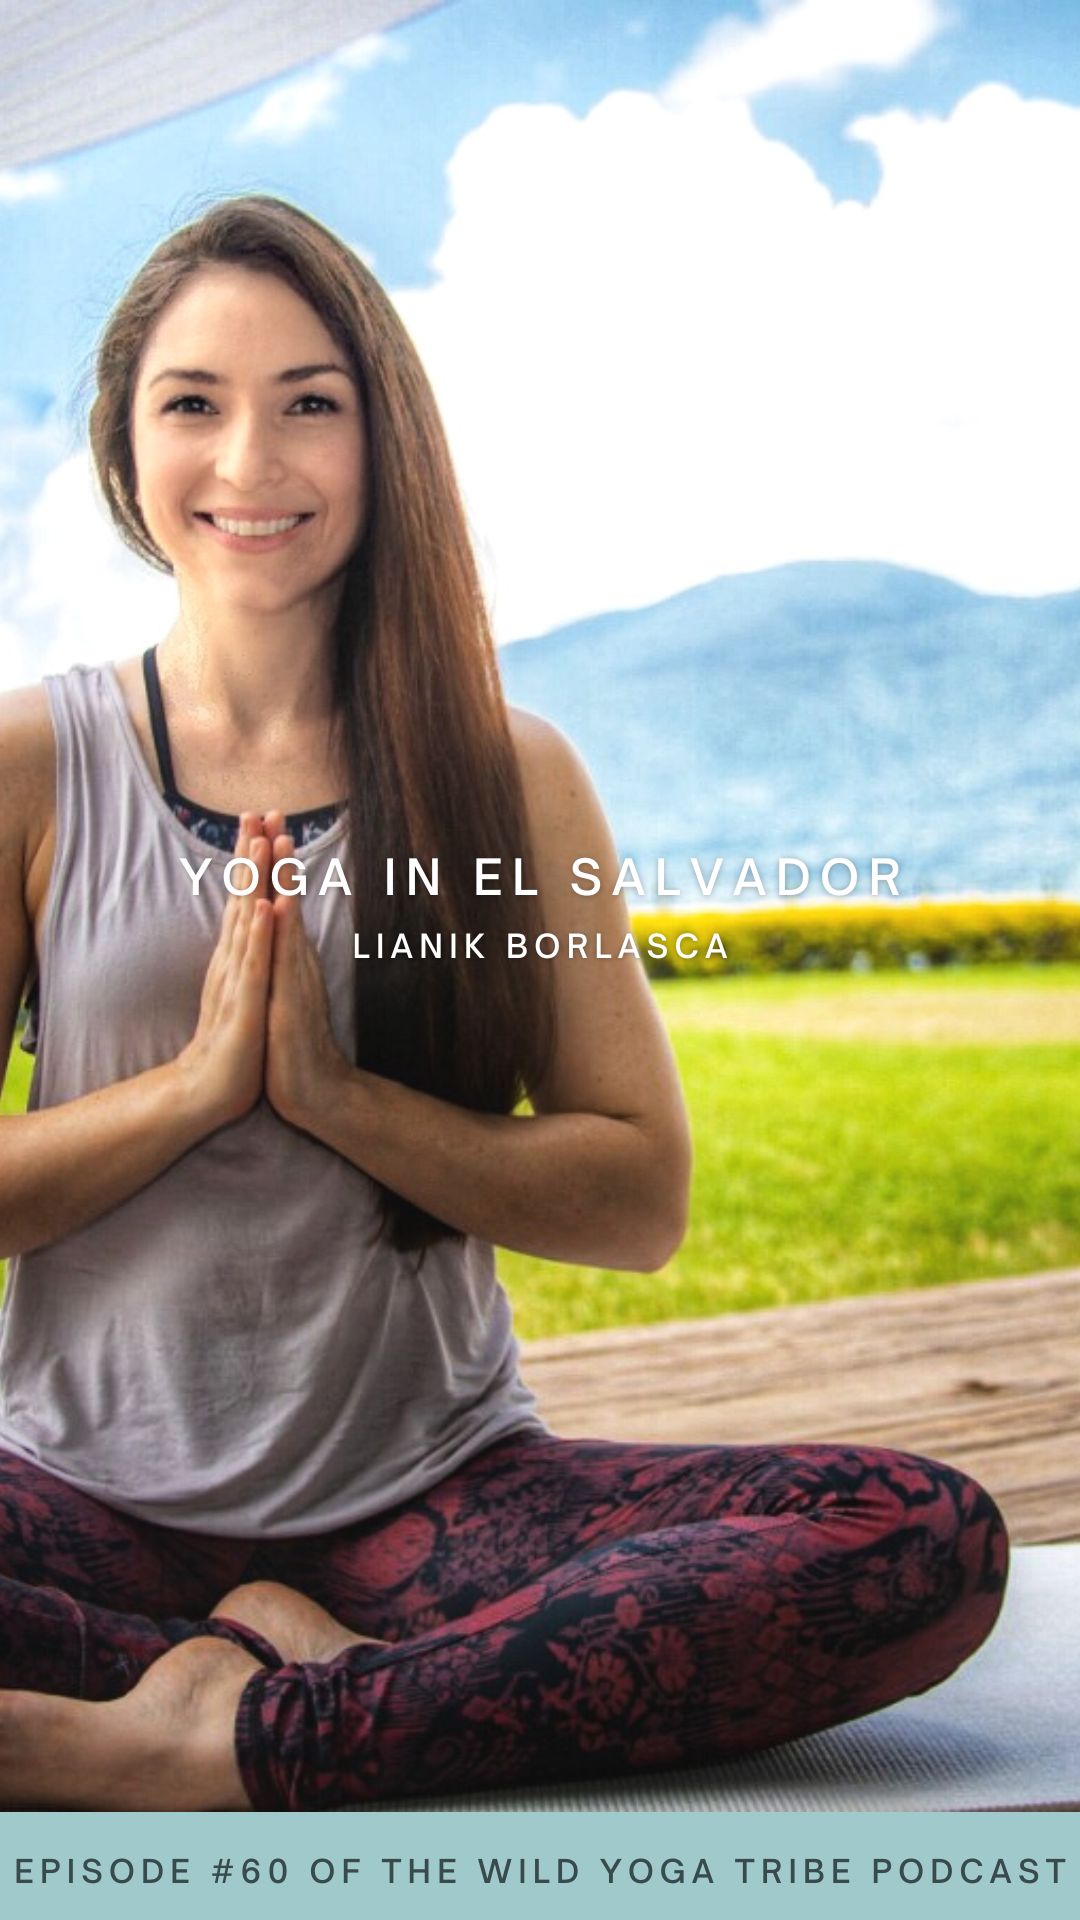 Meet Lianik Borlasca in a yoga teacher from El Salvador who shares with us all about how yoga is a path and a destination at the same time. Welcome to yoga in El Salvador!